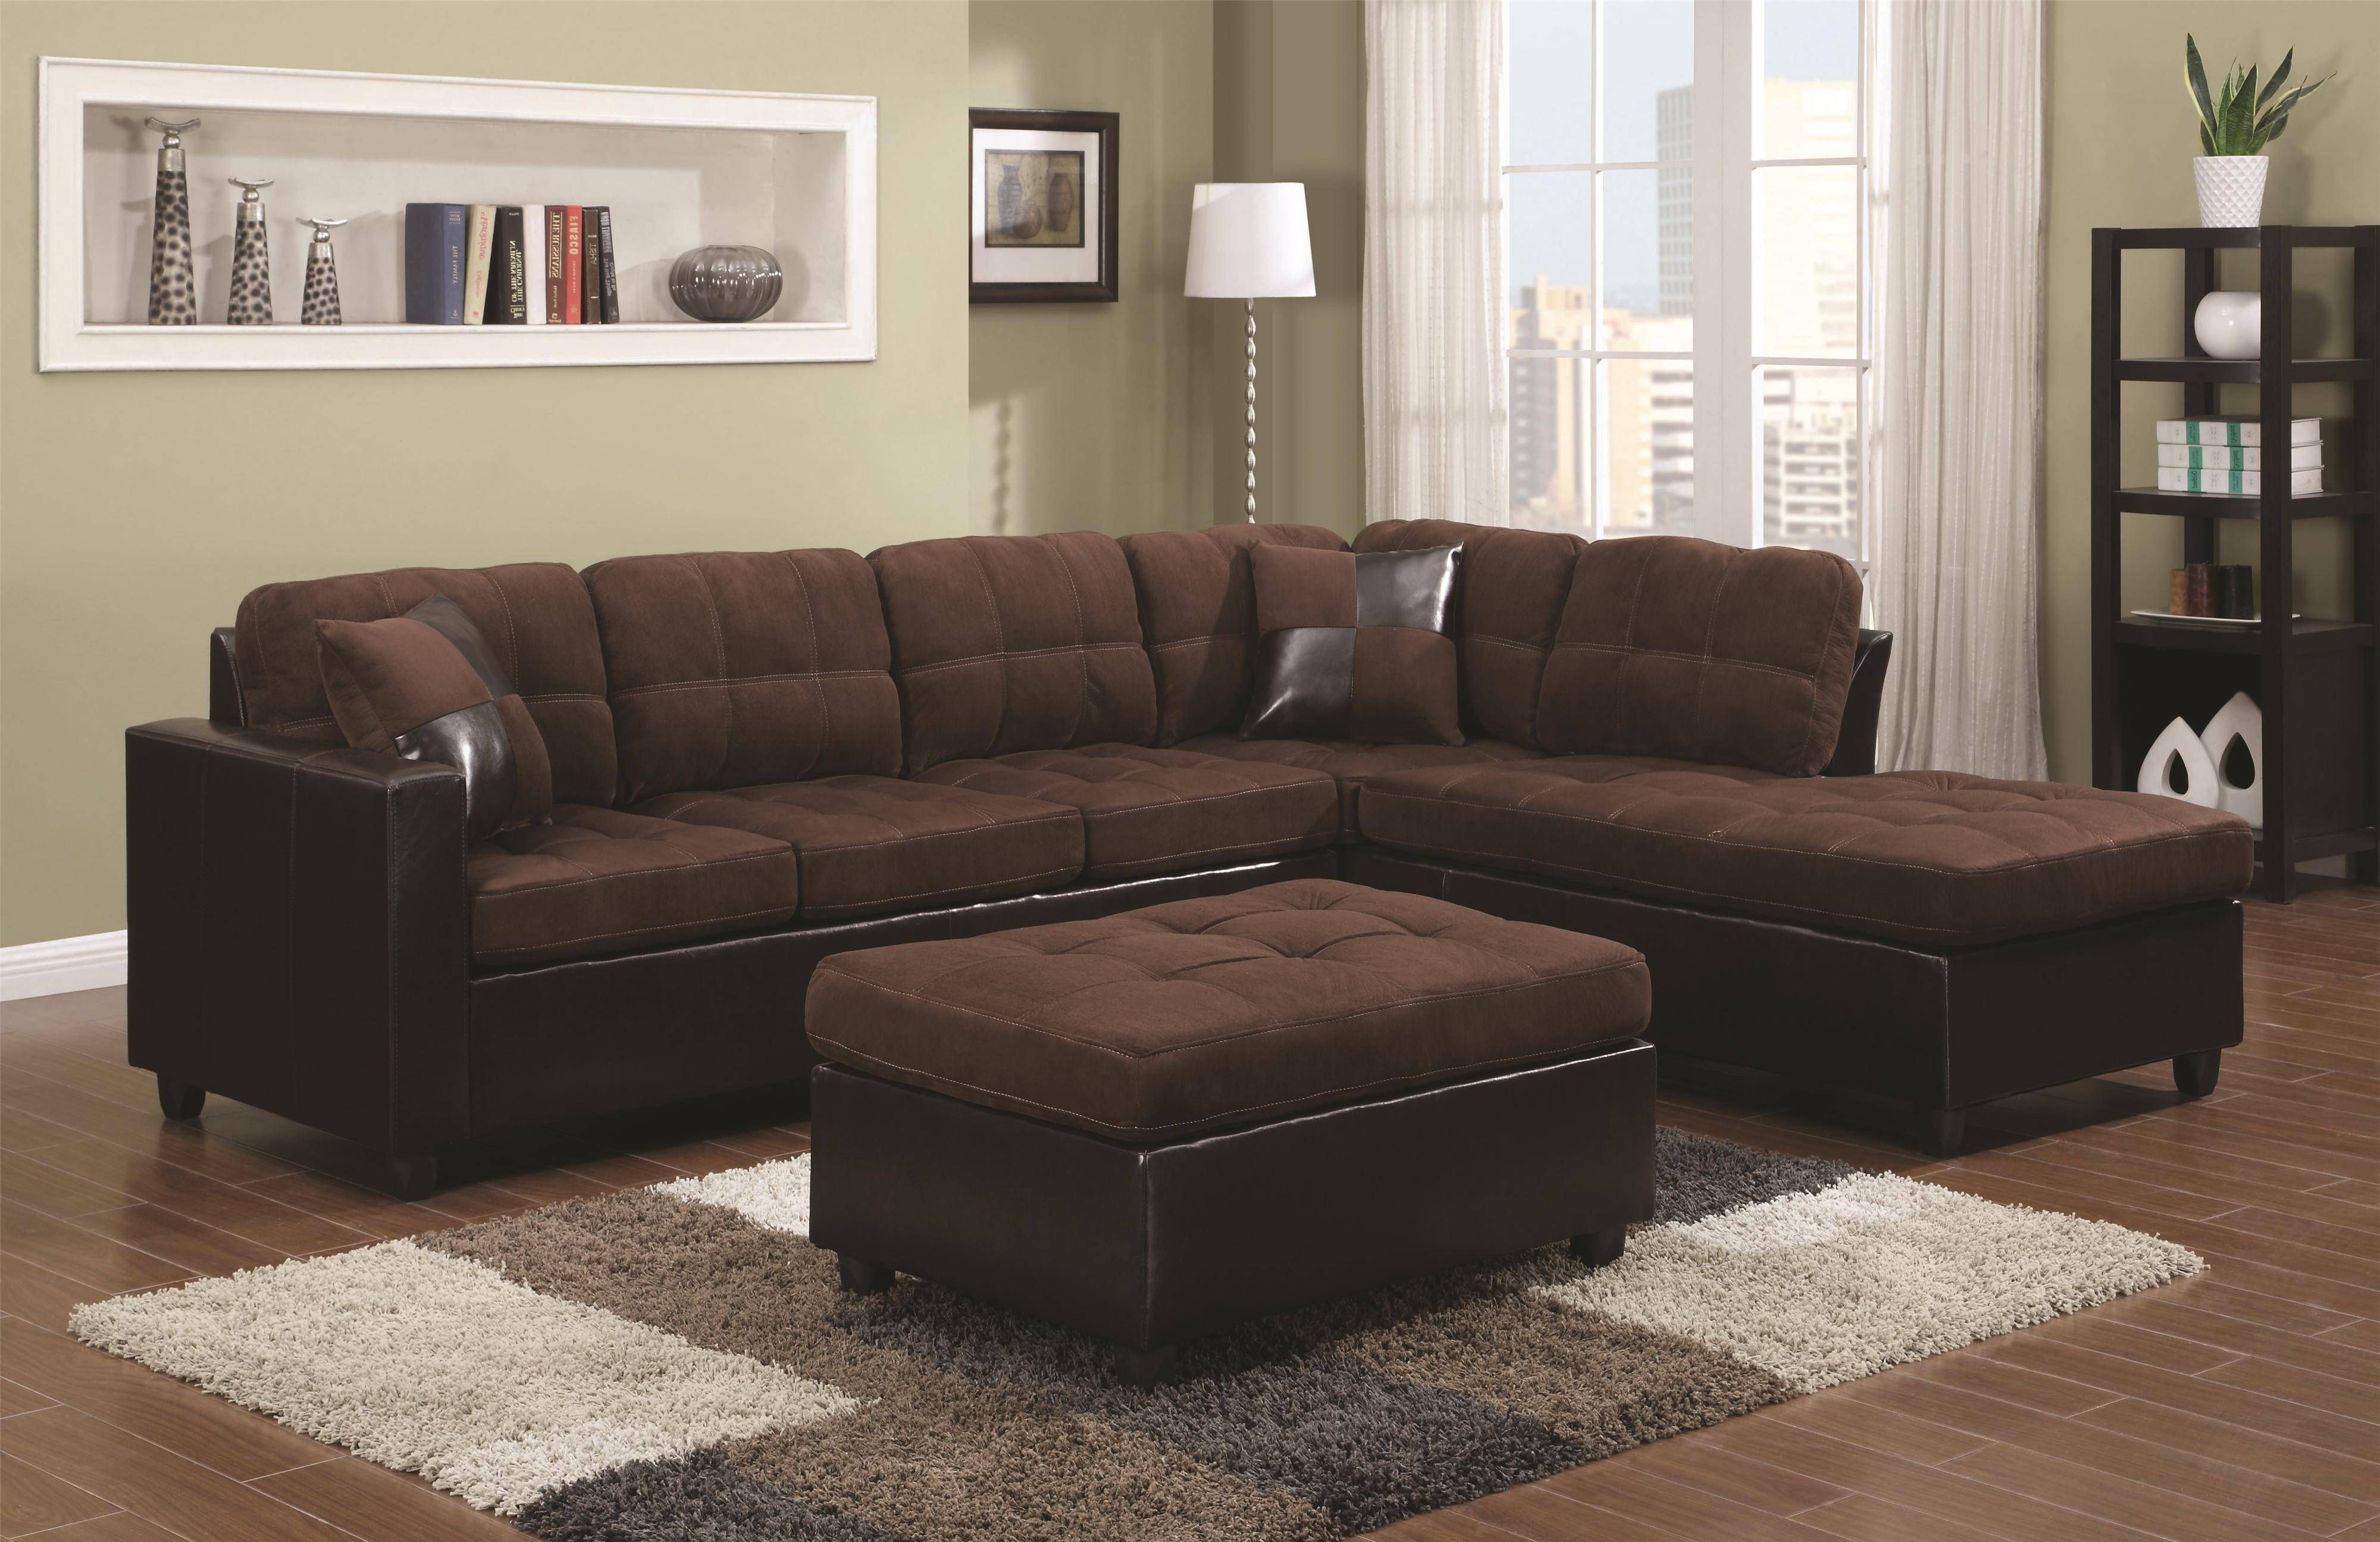 Coaster Mallory Reversible Sectional With Casual And Contemporary With Coaster Sectional Sofas (View 13 of 15)